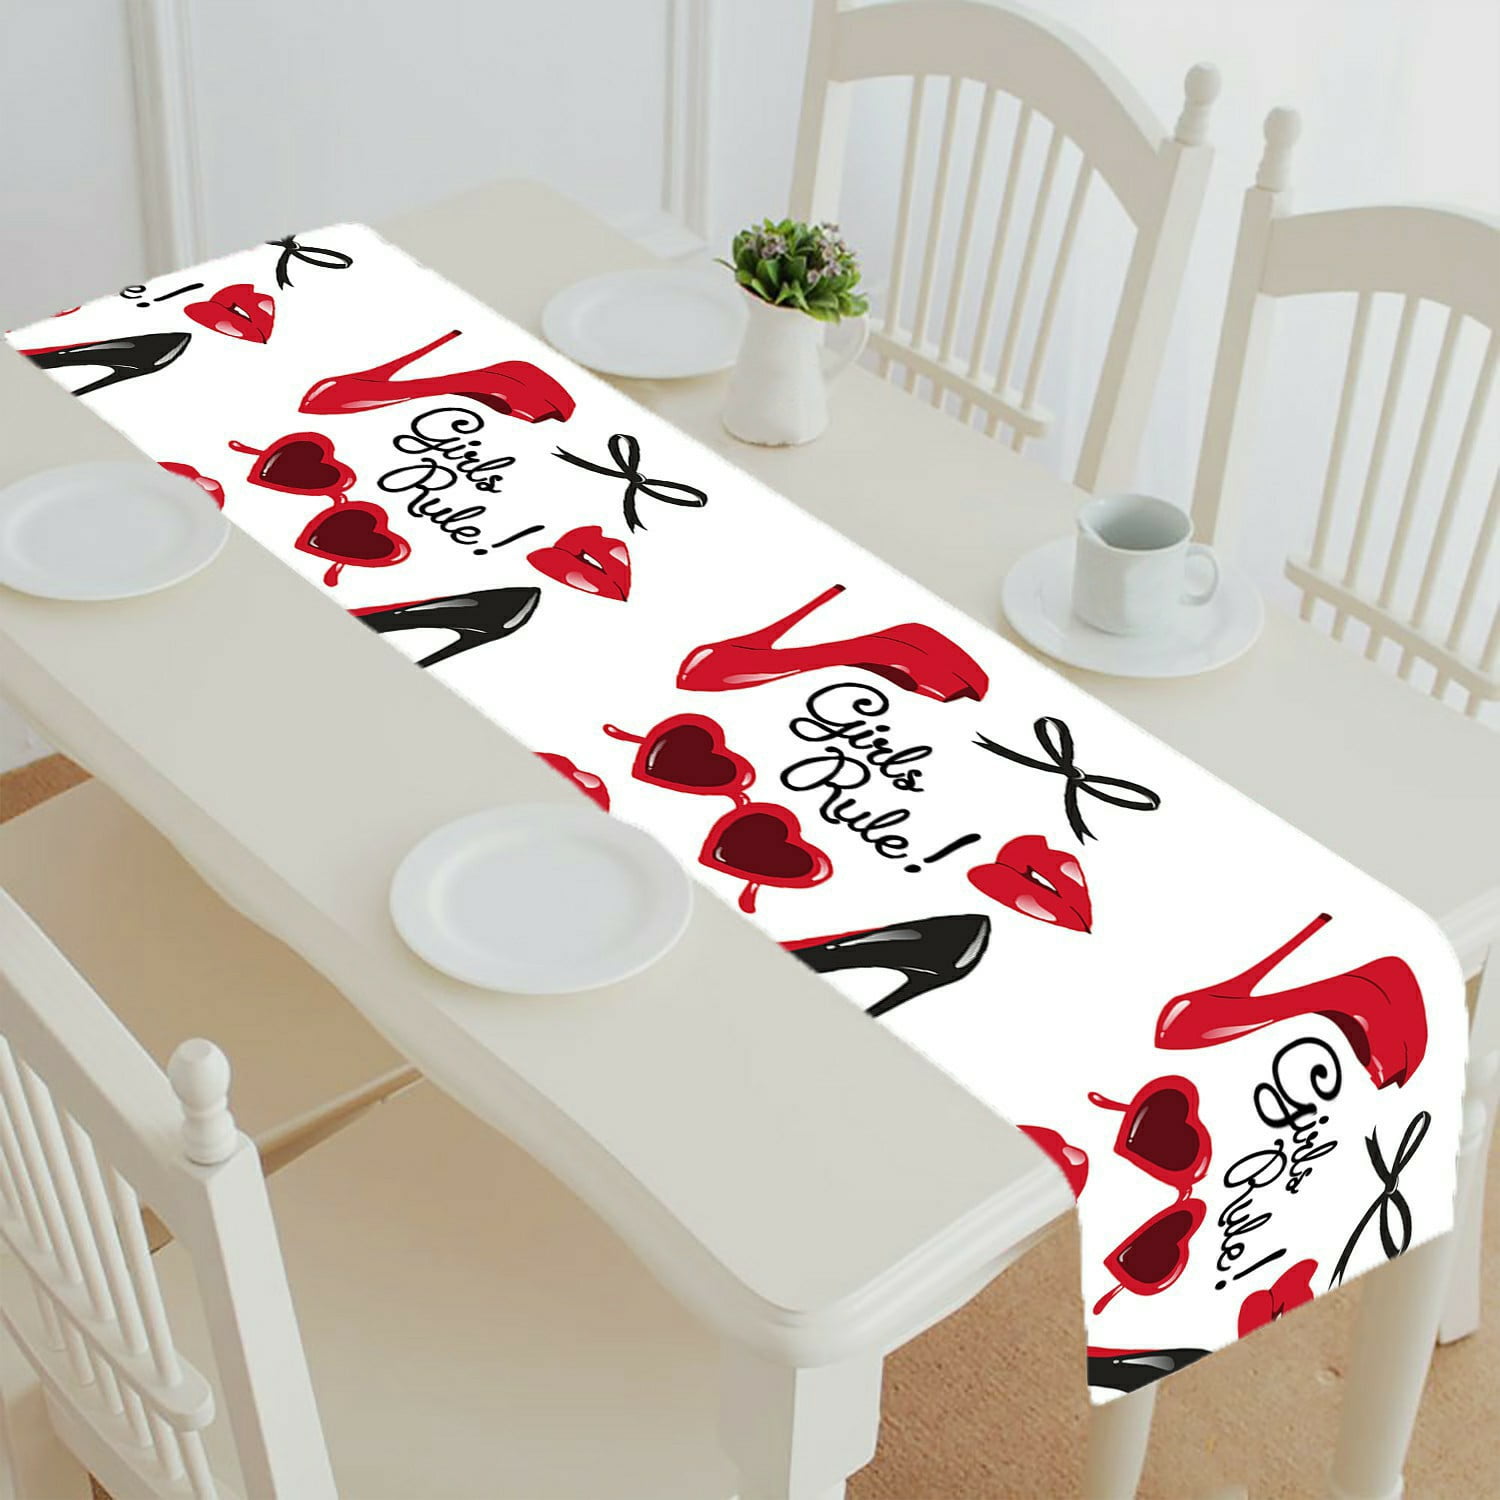 Silhouette of Lady with Red Lips Durable Table Mats Set for Dining Table Cotton Linen Placemats Set of 6 and Table Runner 72 x 16 Parties Catering Events 